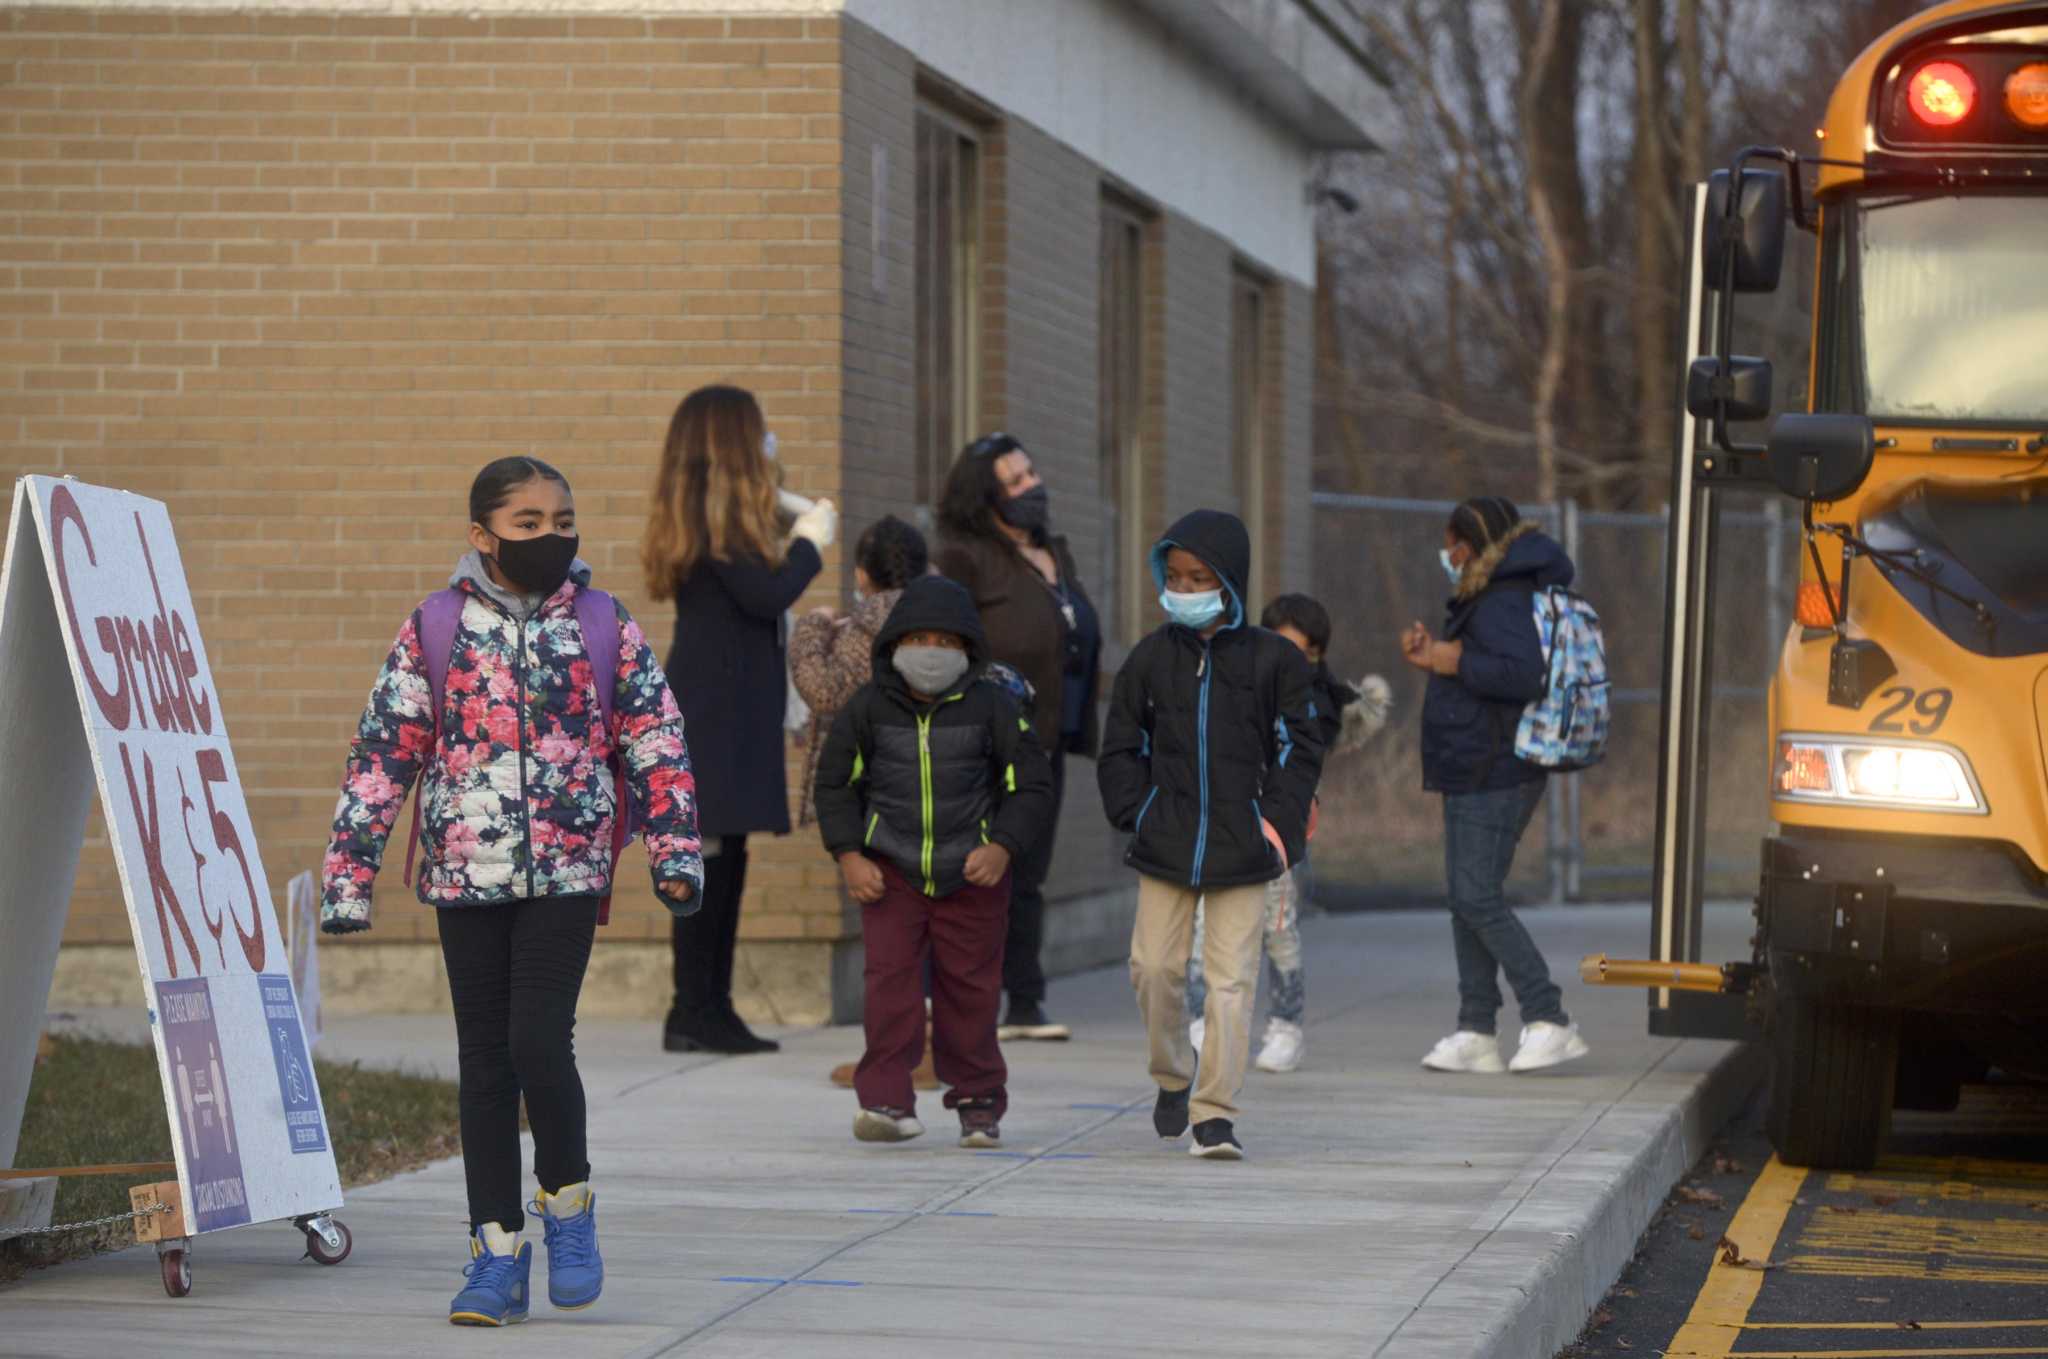 danbury-schools-aim-to-fully-reopen-in-april-but-some-students-may-not